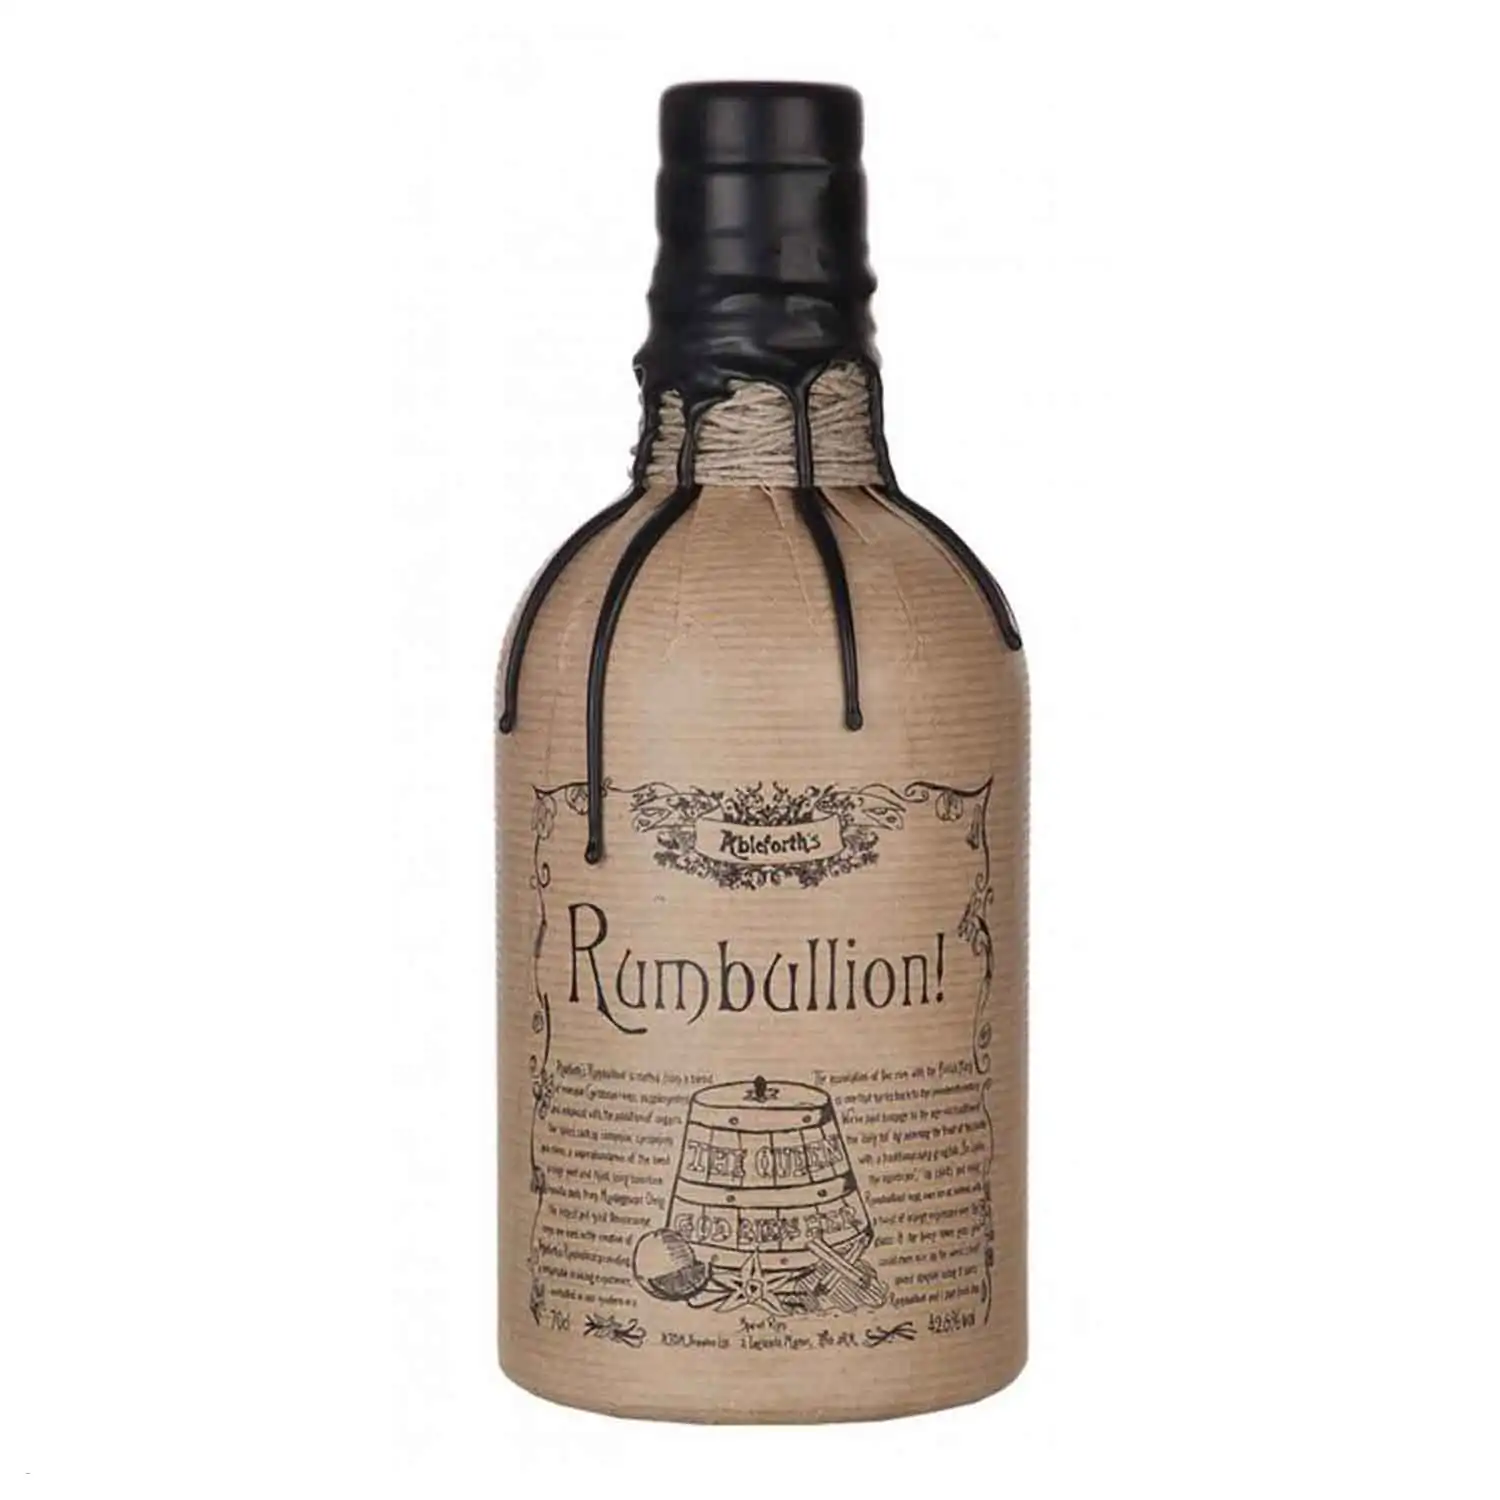 Ableforths Rumbullion 70cl Alc 42,6% - Buy at Real Tobacco